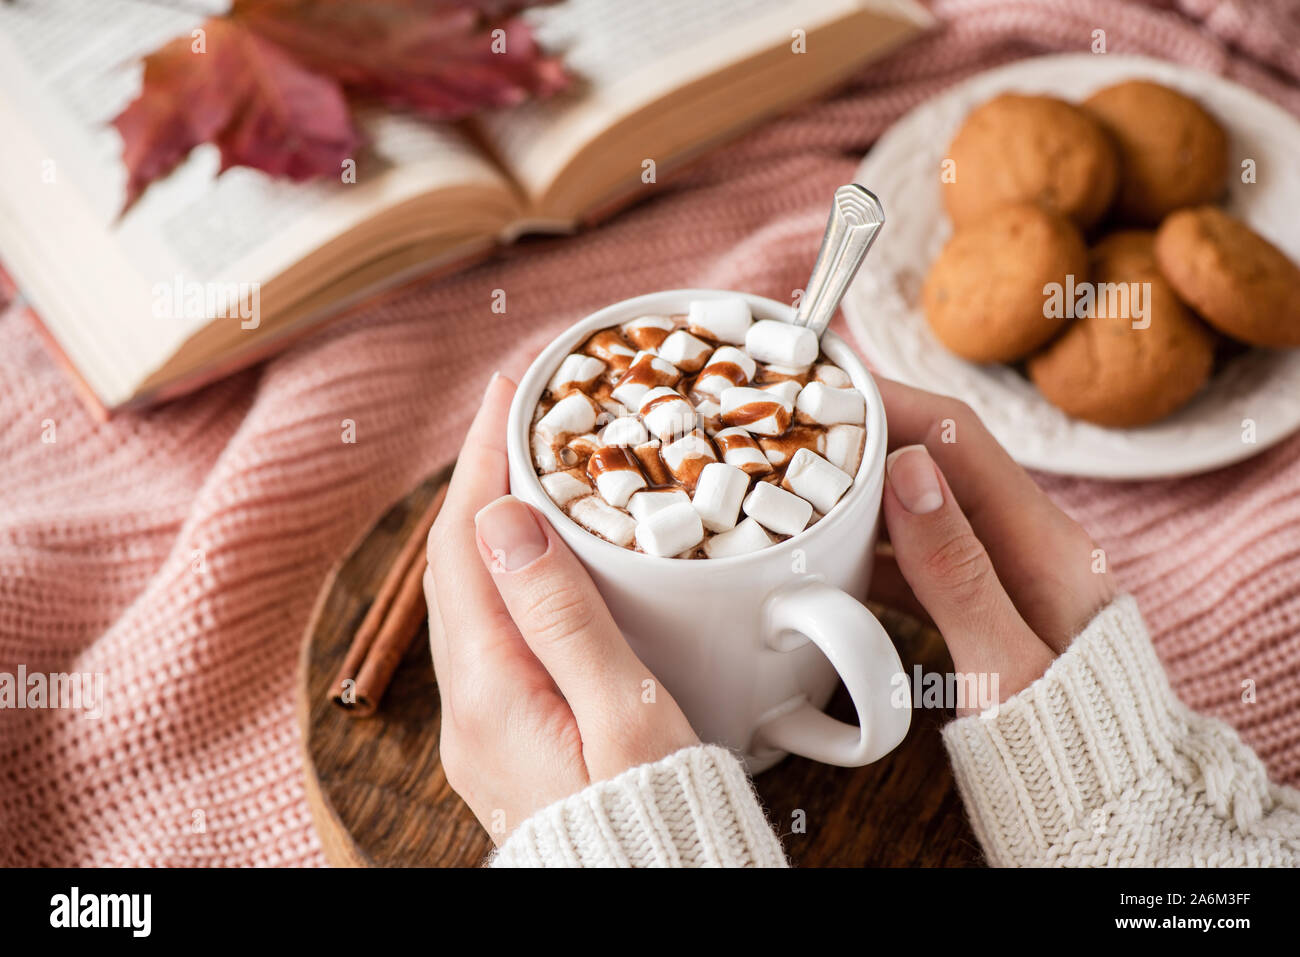 Hot chocolate with marshmallows in female hands. Hot beverage cozy comfort food for autumn and winter holidays season Stock Photo